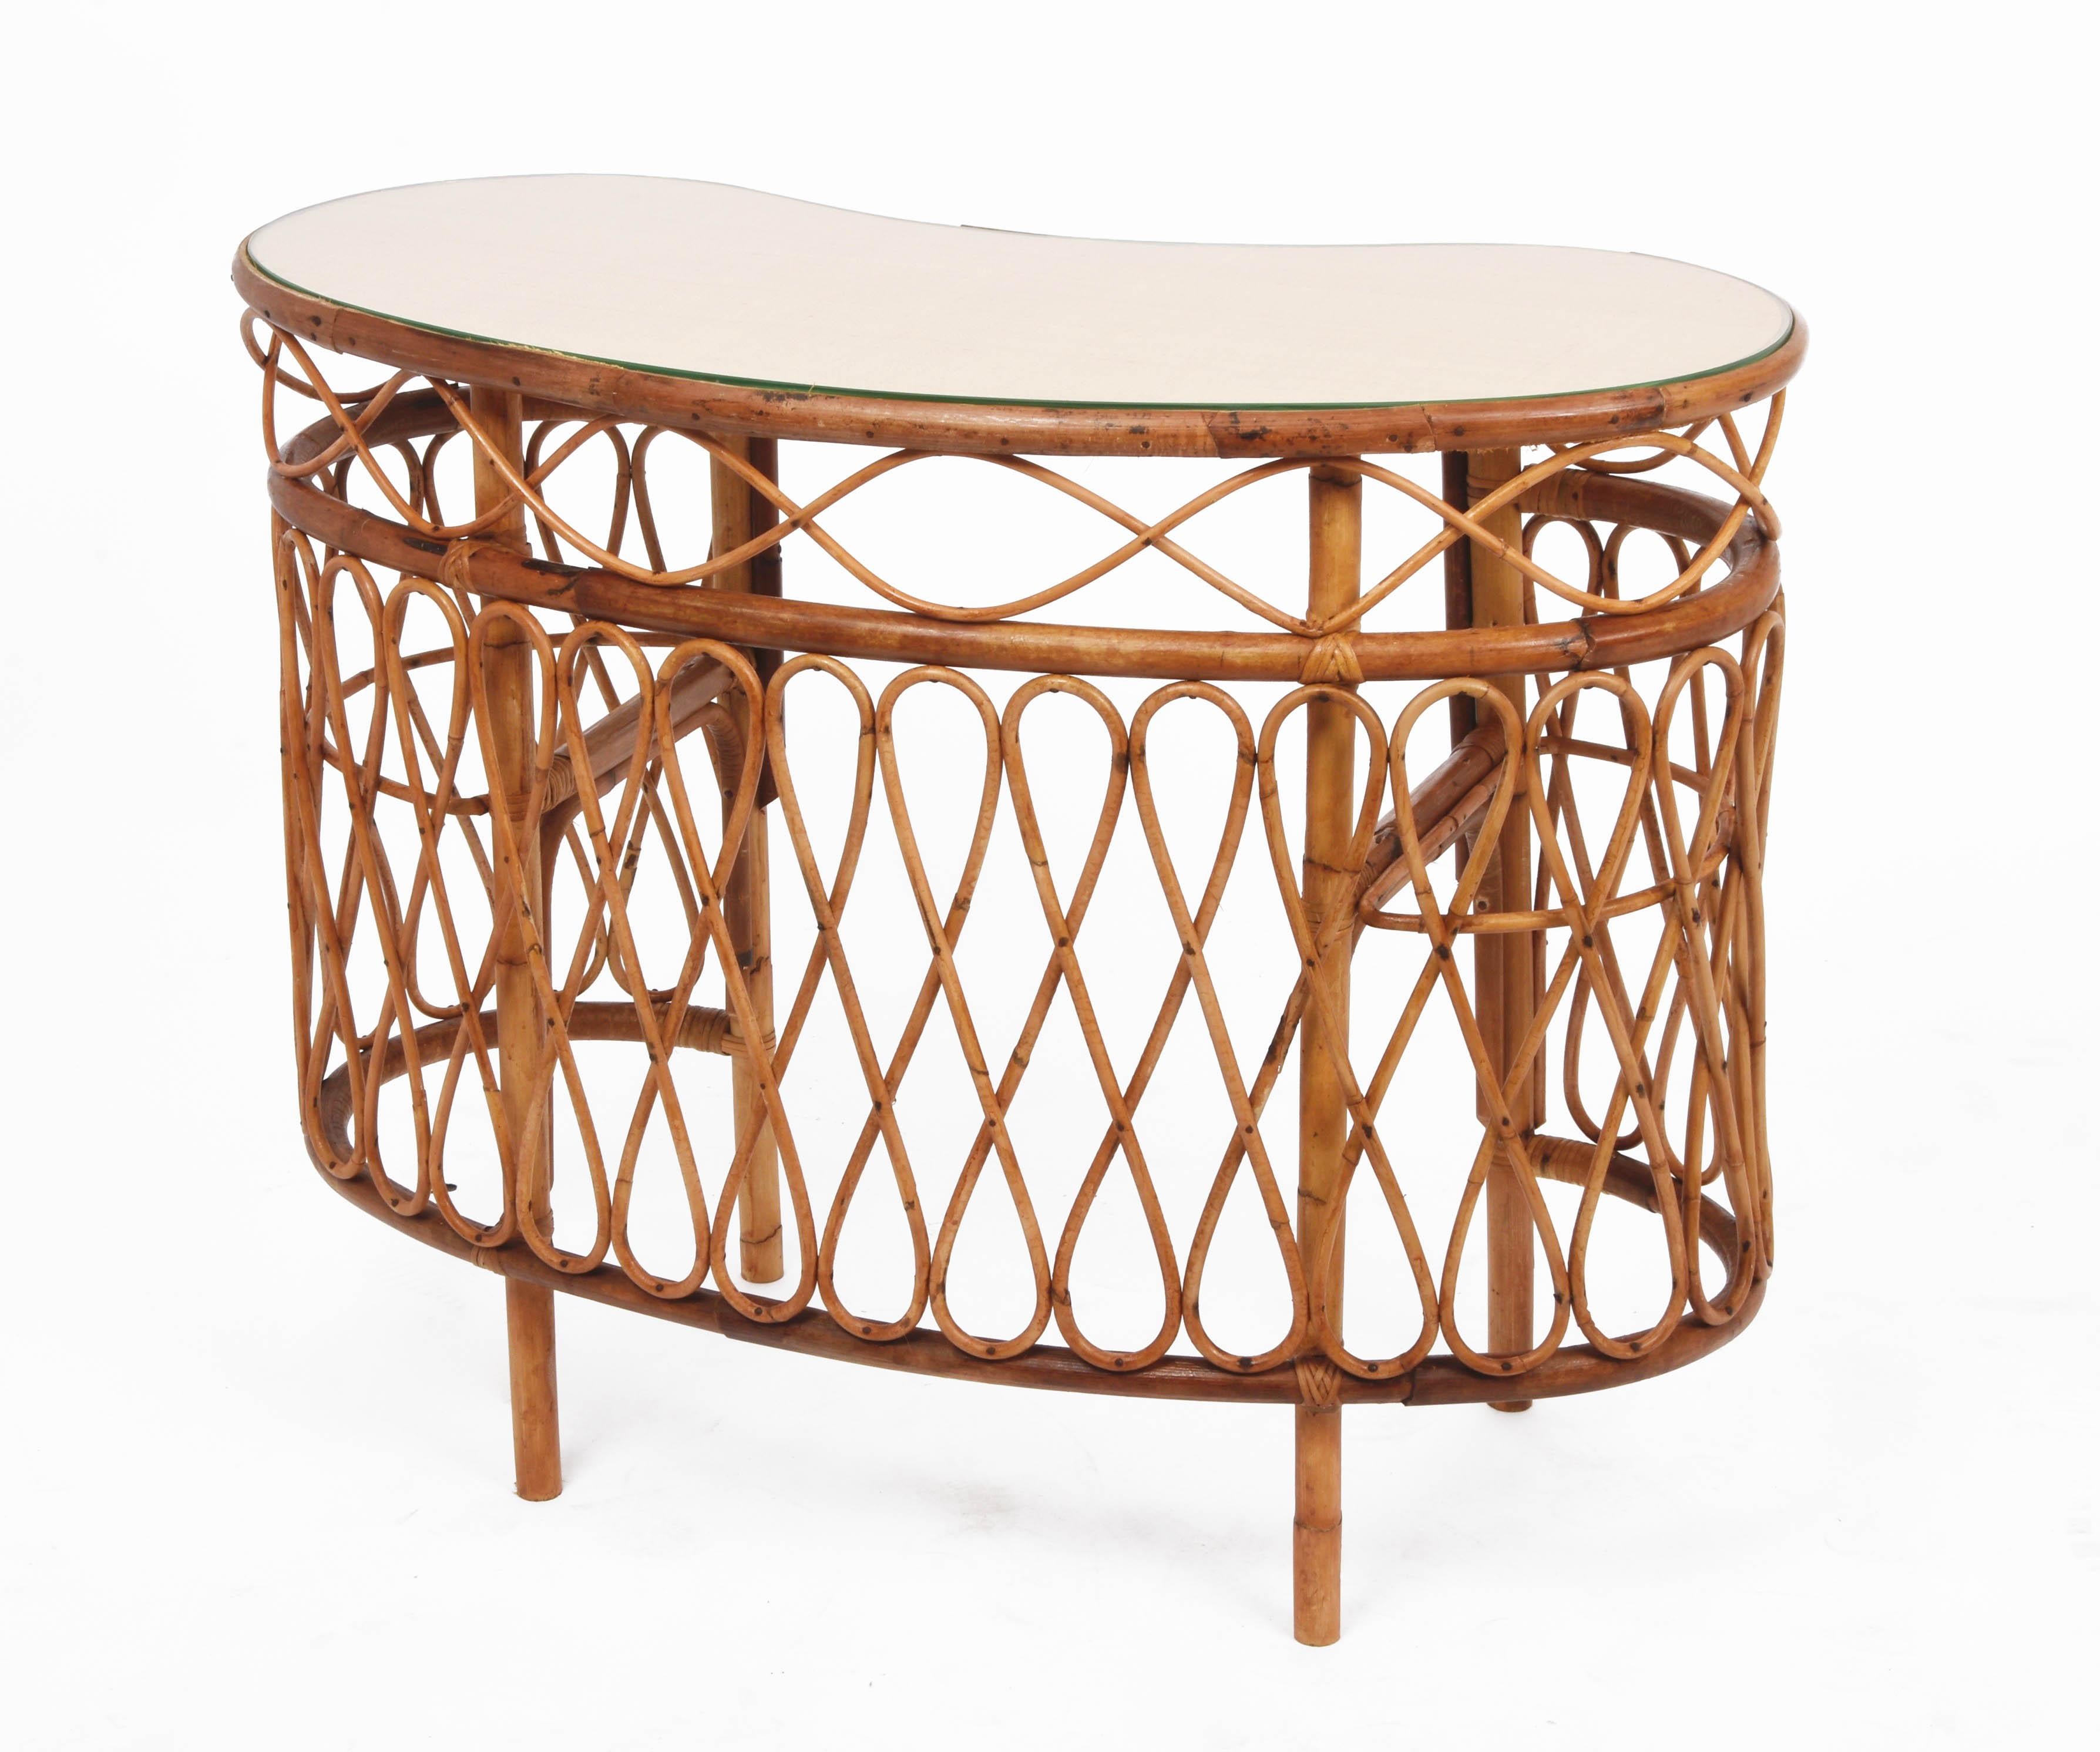 Eye-catching bean-shaped console in bamboo and rattan with glass top and two internal crescent glass shelves. This piece was produced following the style of Franco Albini in Italy during the 1970s.

This fantastic console table has four bamboo